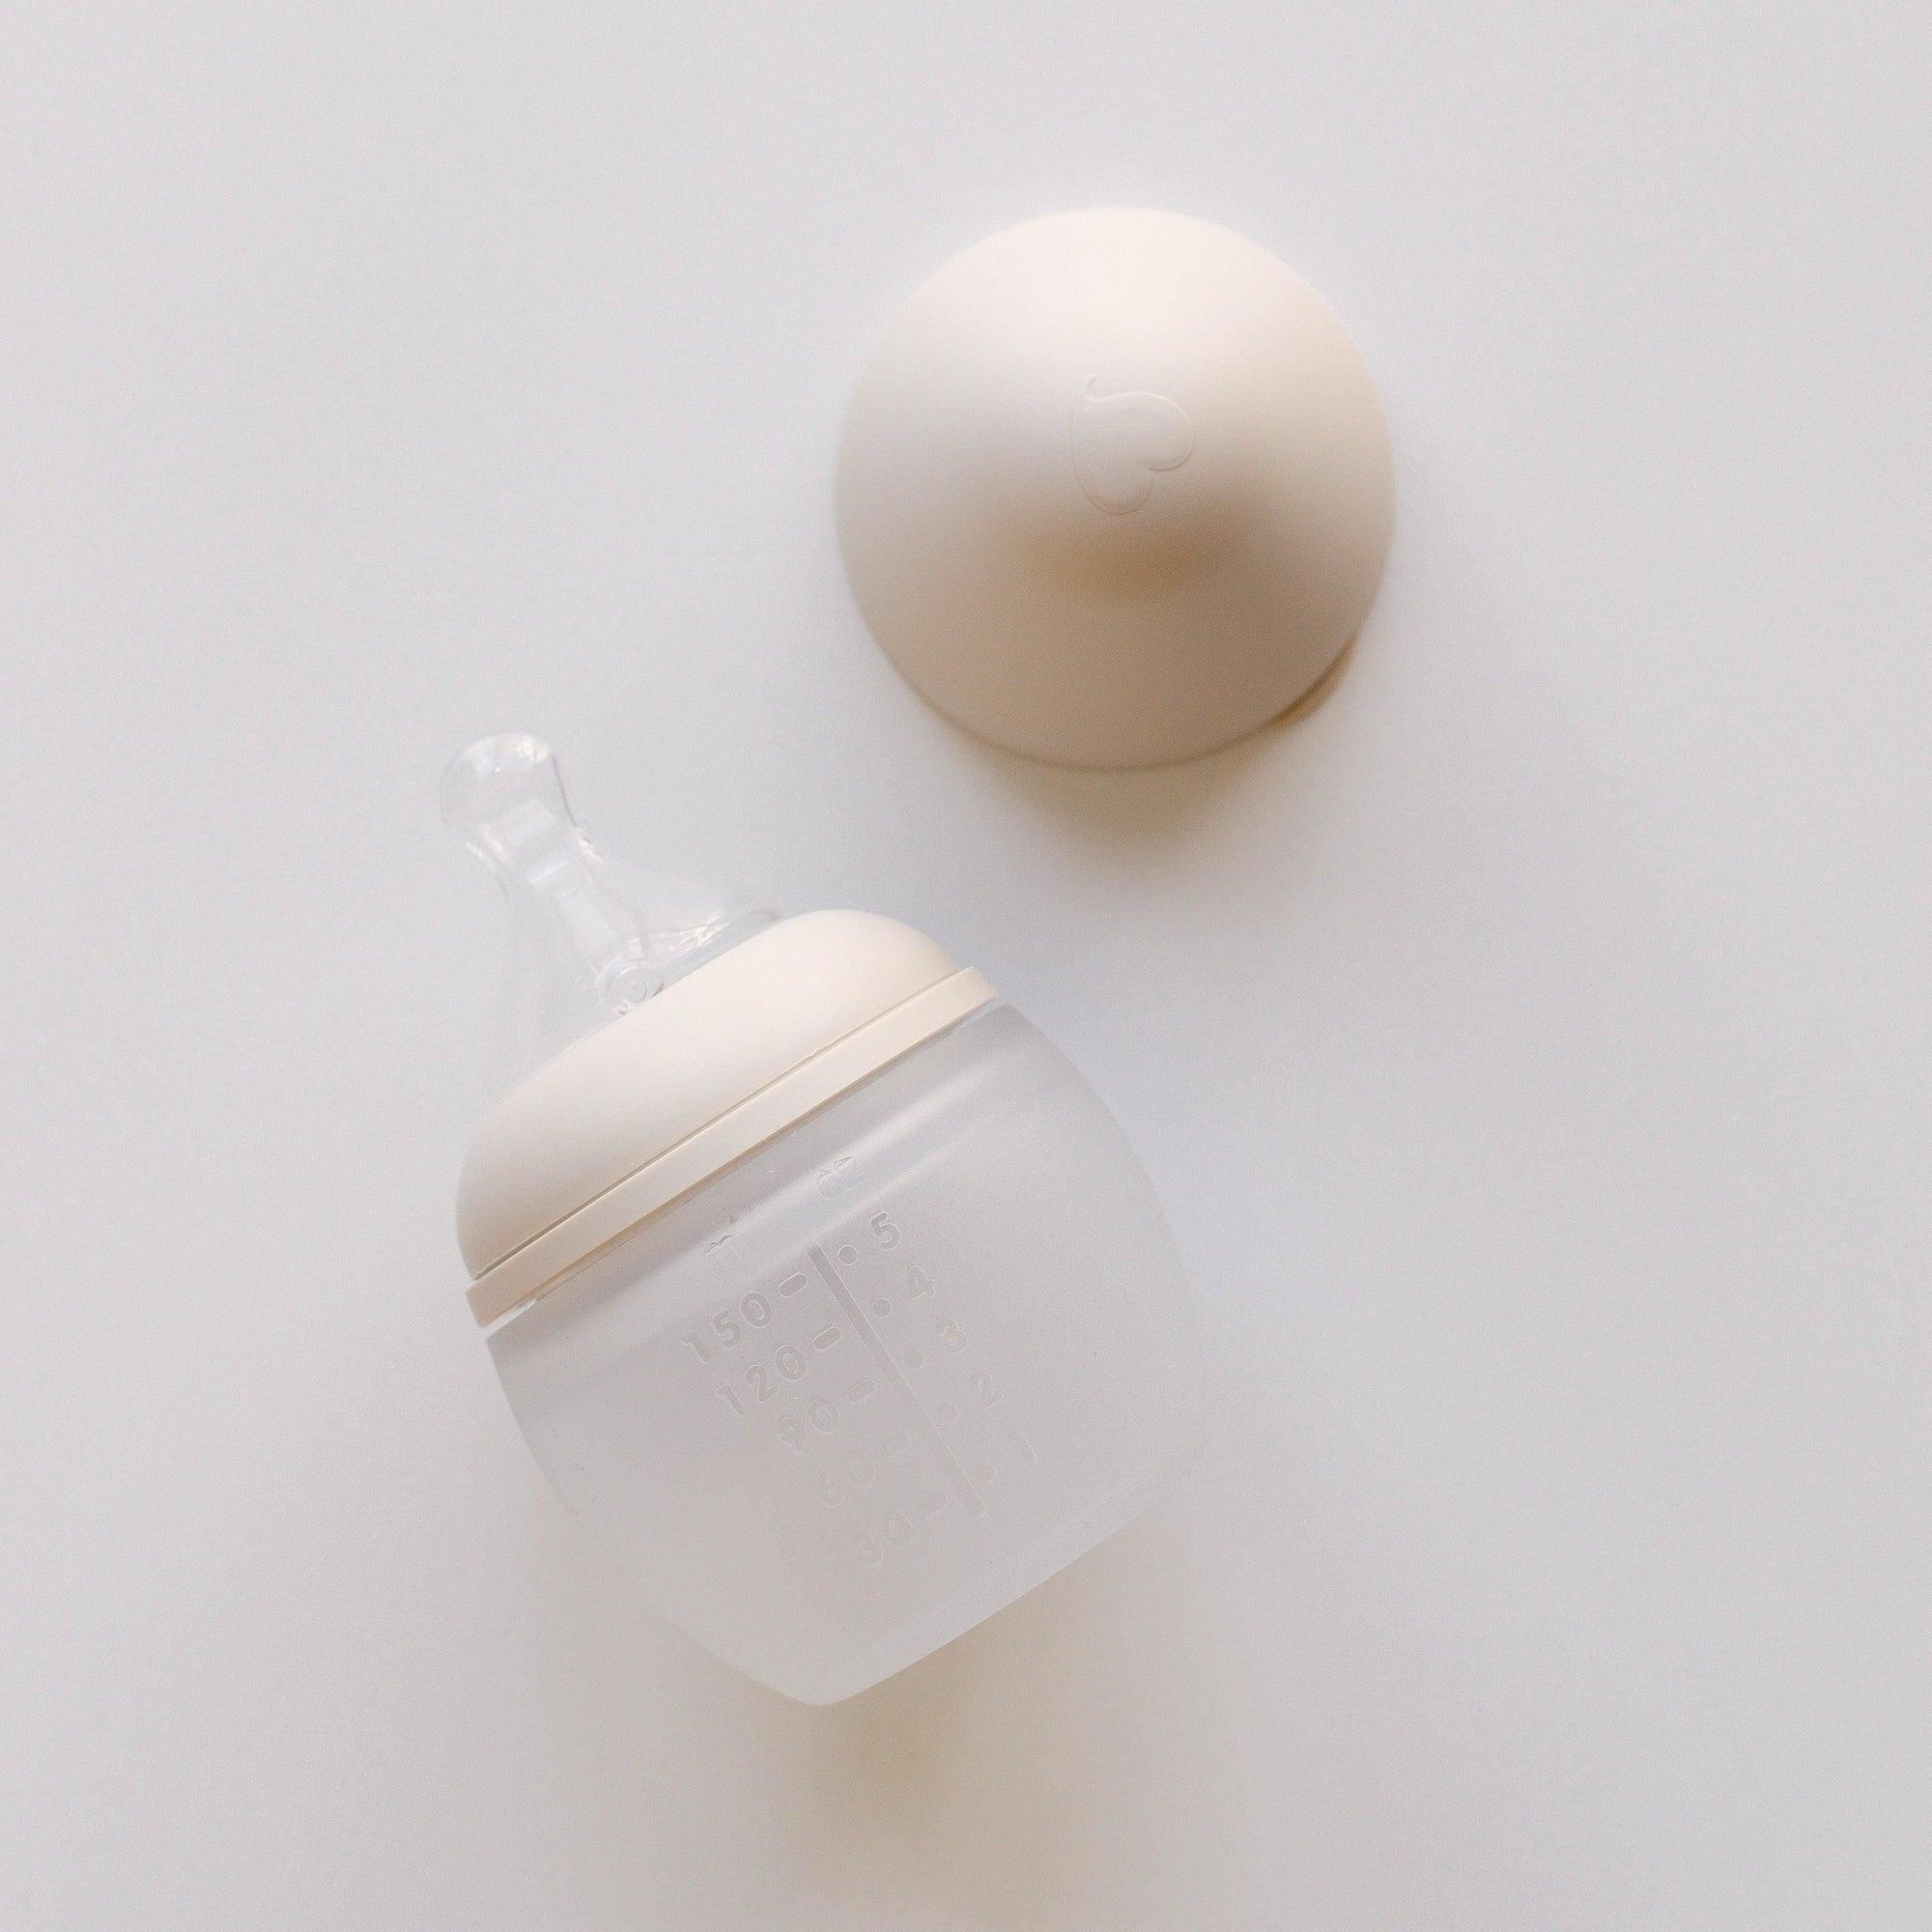 An Elhée France baby bottle in the shade sand laying on a white surface.